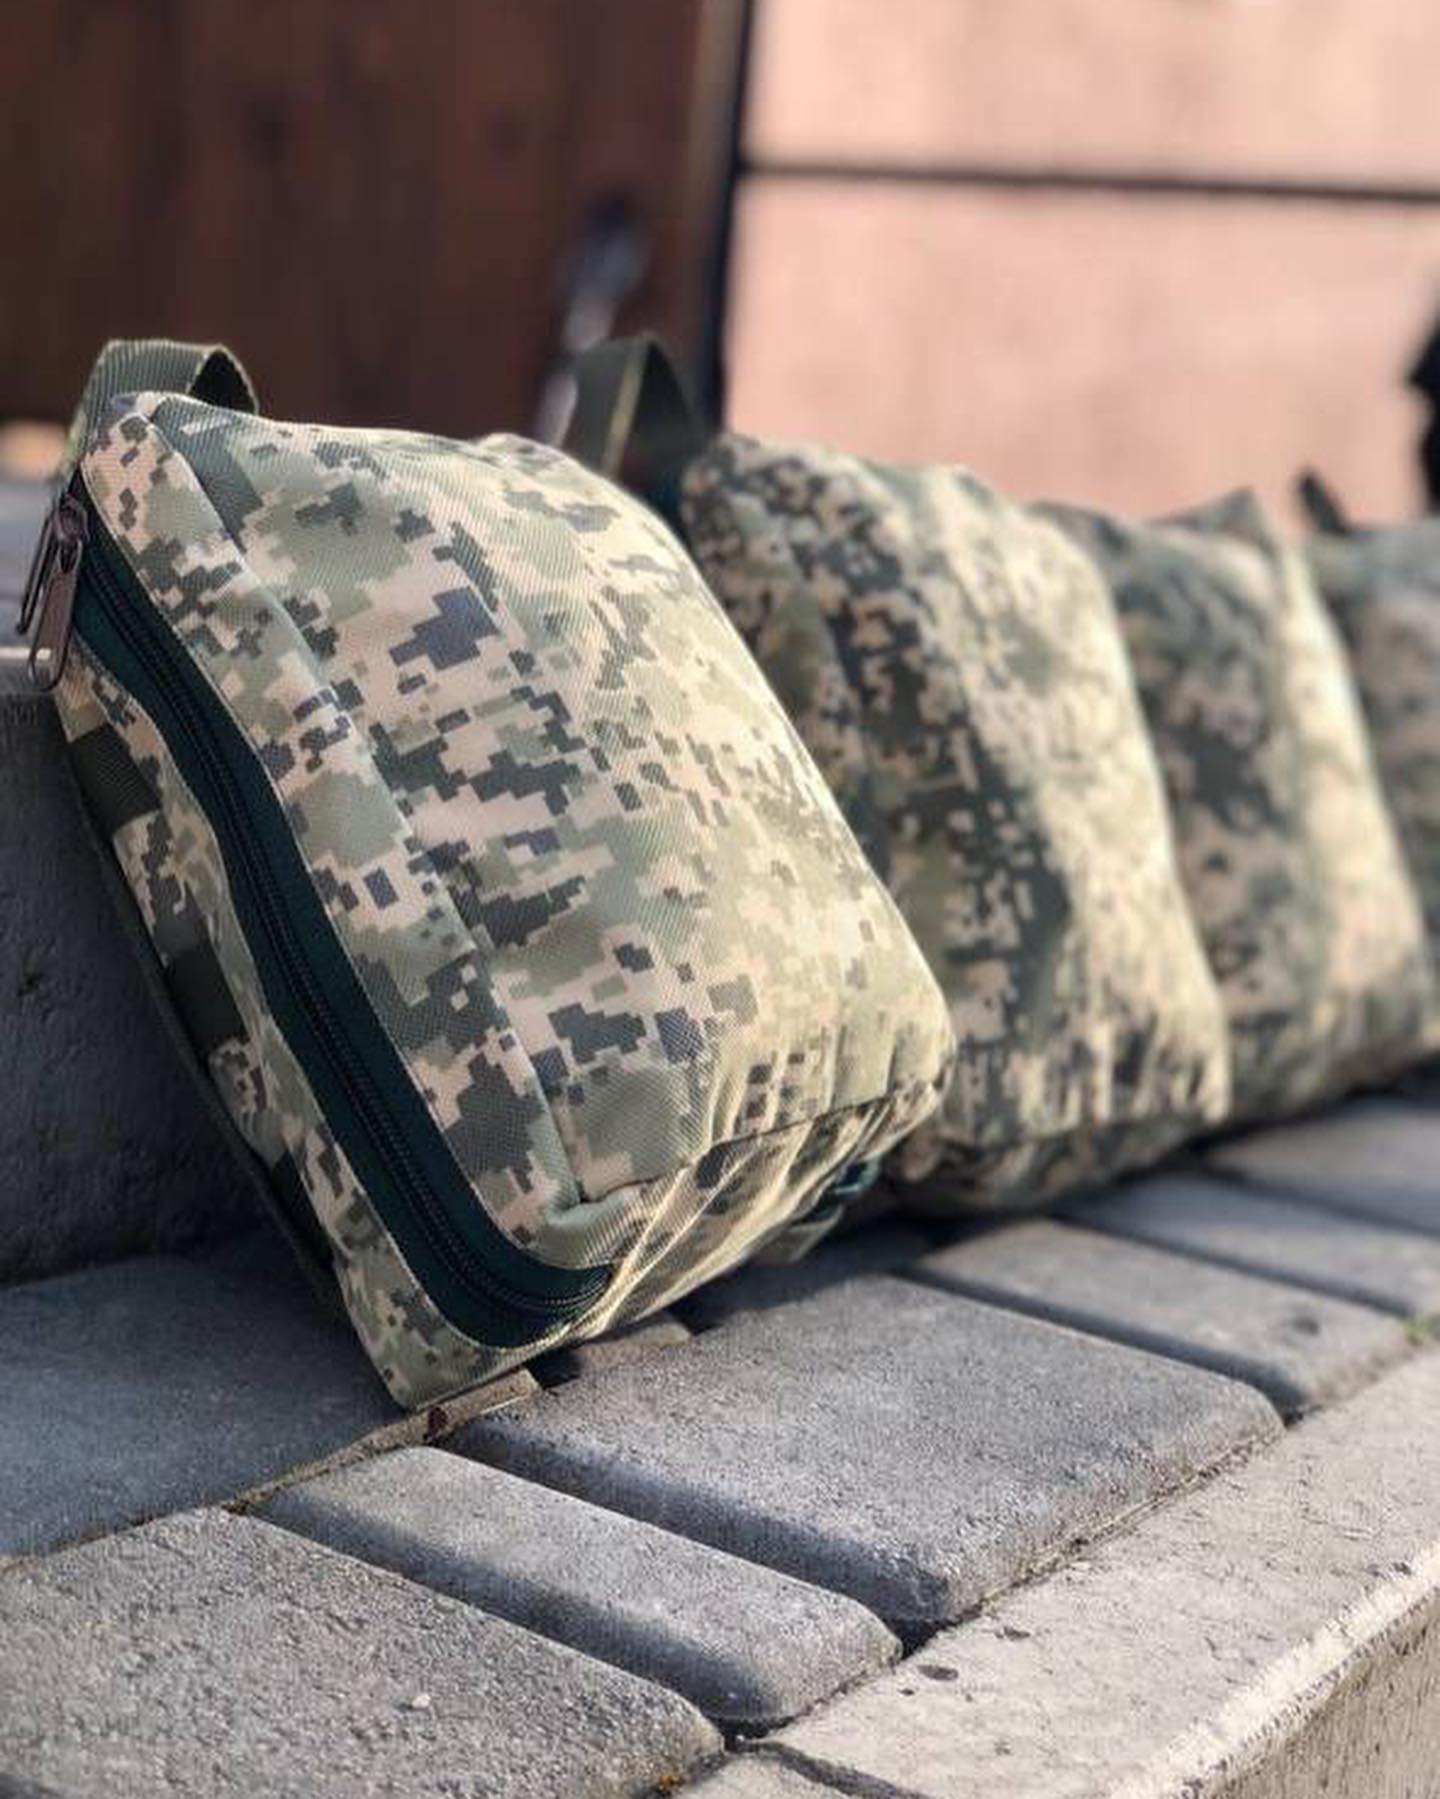 Four camouflage bags sitting on a bench.